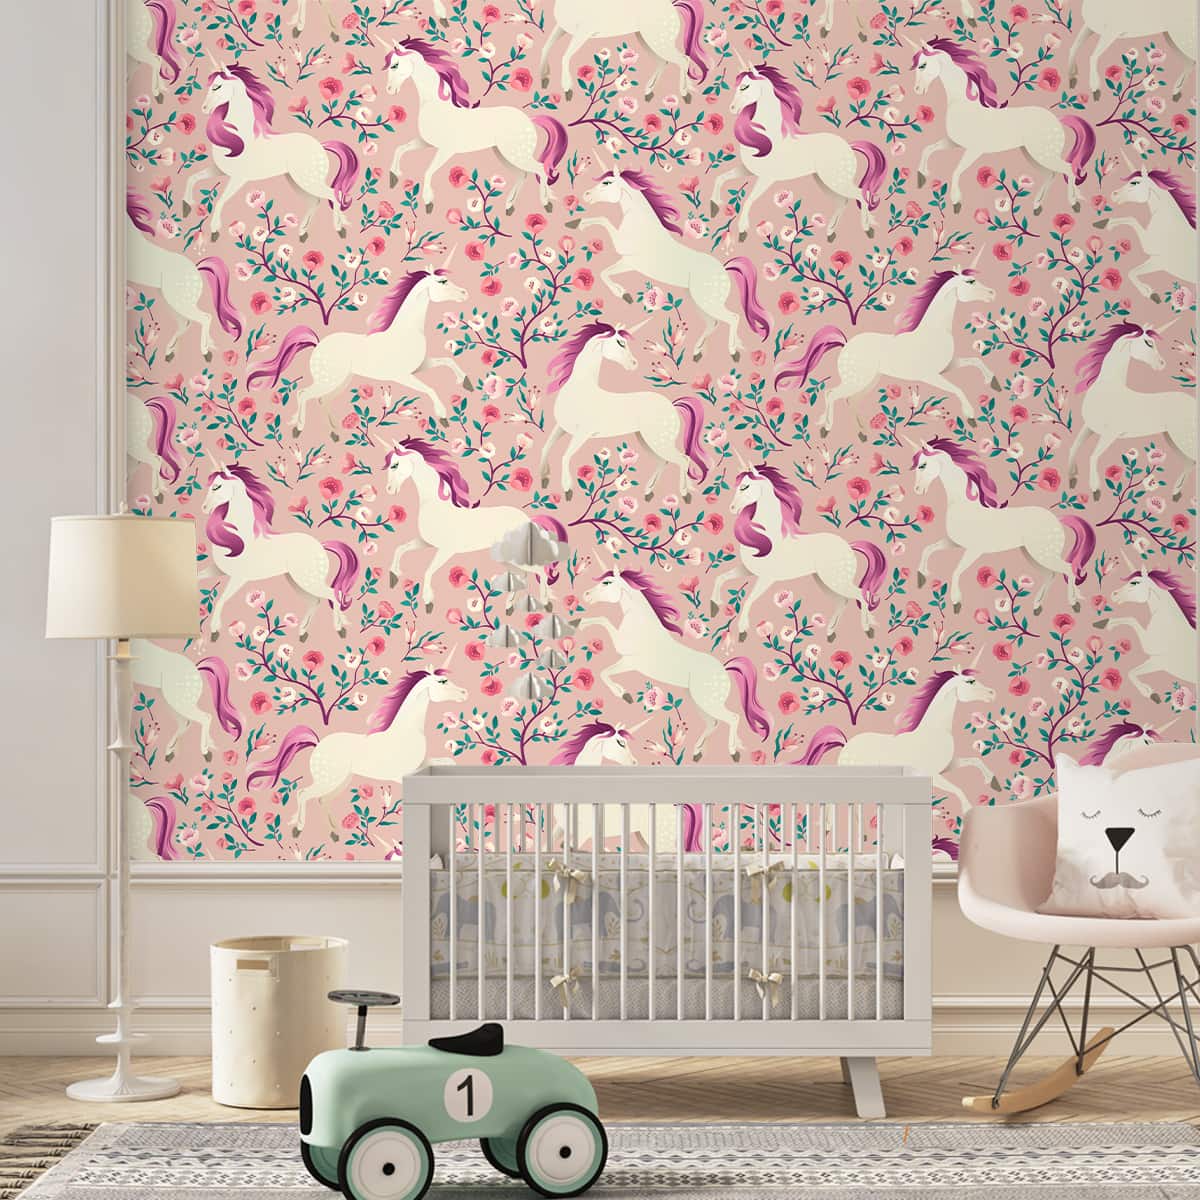 How to Select The Right Wallpaper for A Beautiful Girl's Room